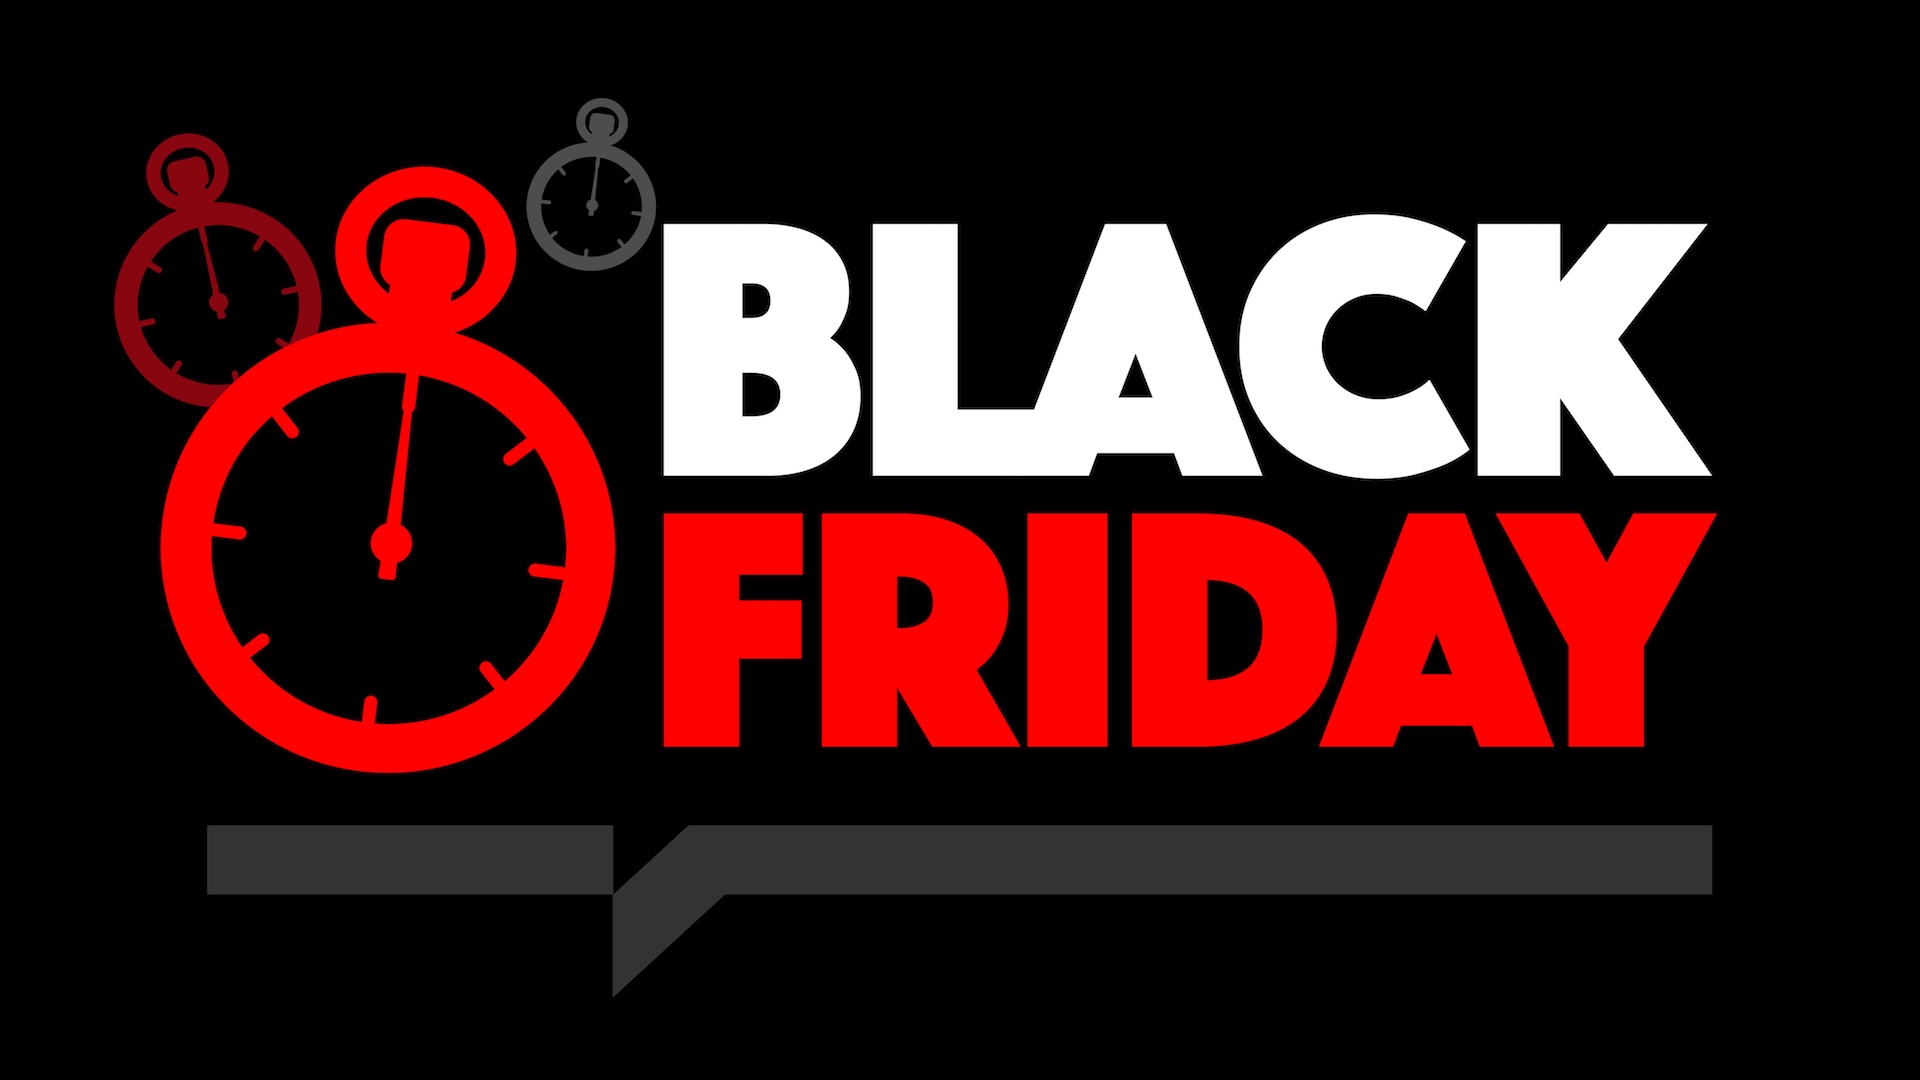 Black Friday Sale - Paris Vacation Rental - Holiday in France - What Sales Are Going On For Black Friday